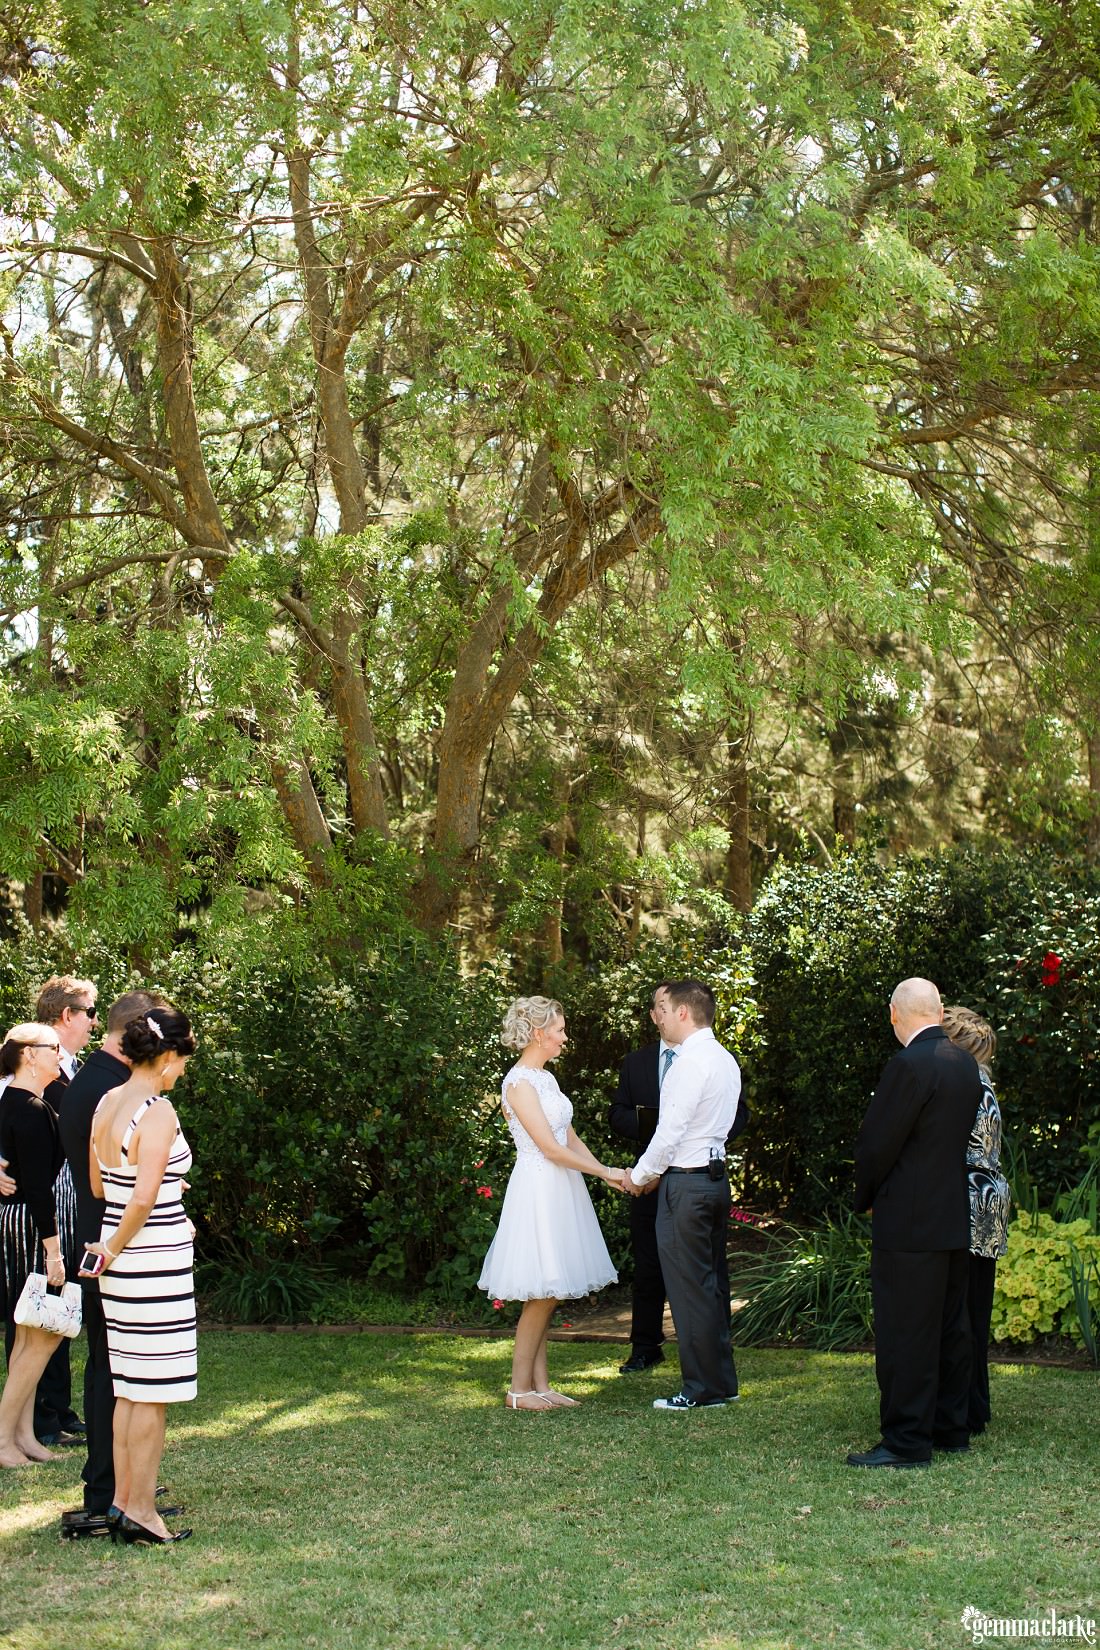 An intimate wedding ceremony in progress under a large tree